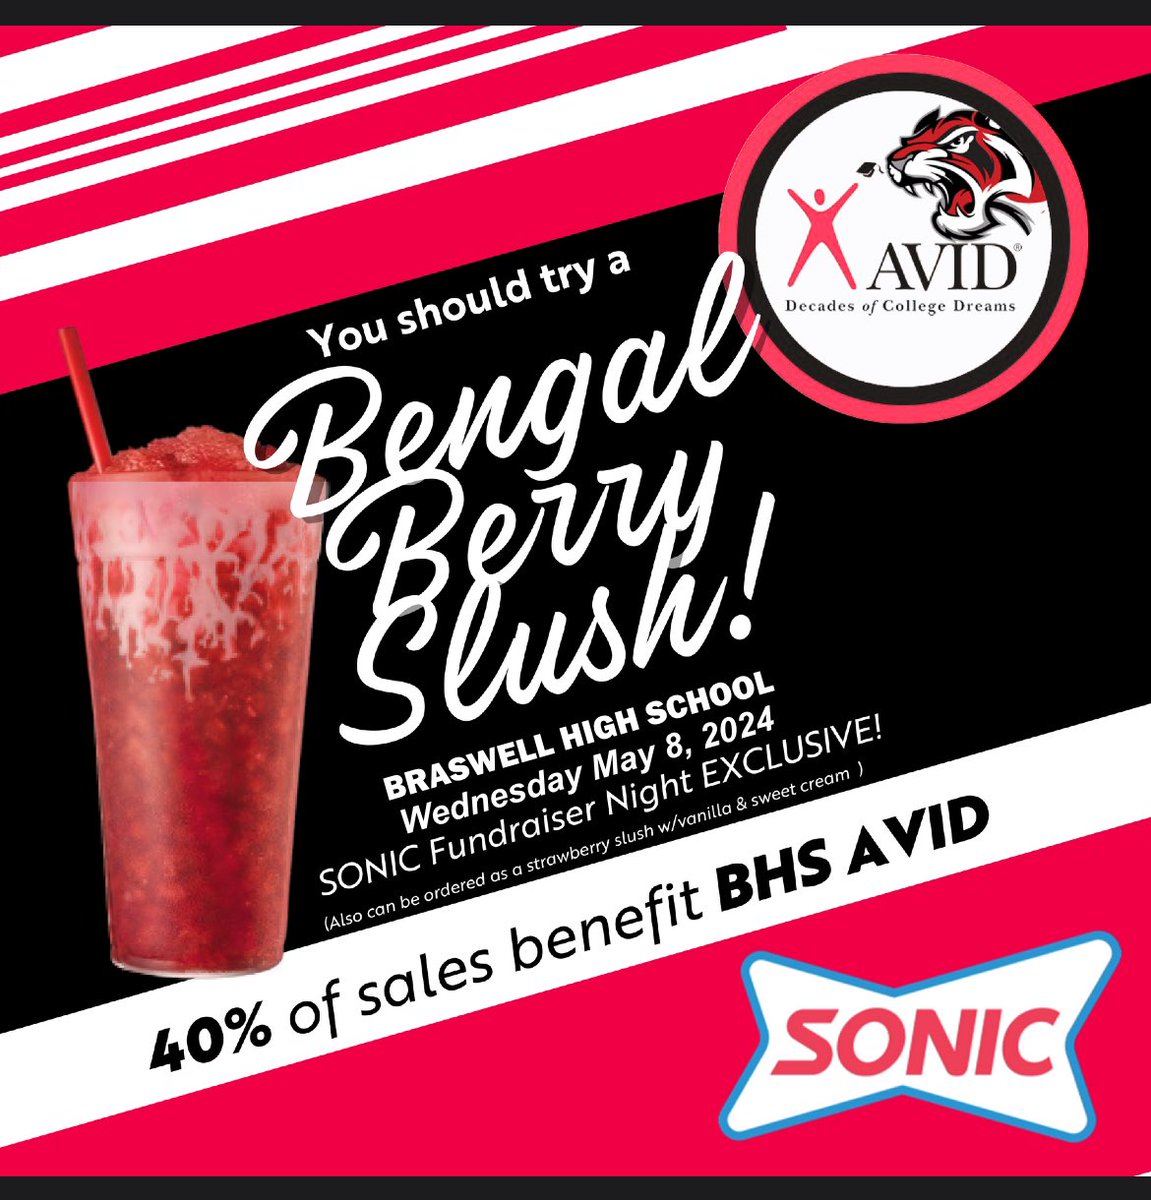 Wednesday, May 8th from 5-8 pm is BHS AVID night at Sonic in Aubrey (next to Enterprise Rent-A-Car)! Please come support the BHS AVID Department! 40% of sales will go to AVID, but you have to say you’re with BHS AVID! @braswellhs @bengalcounselor @BHSfreshZONE @BraswellStuCo